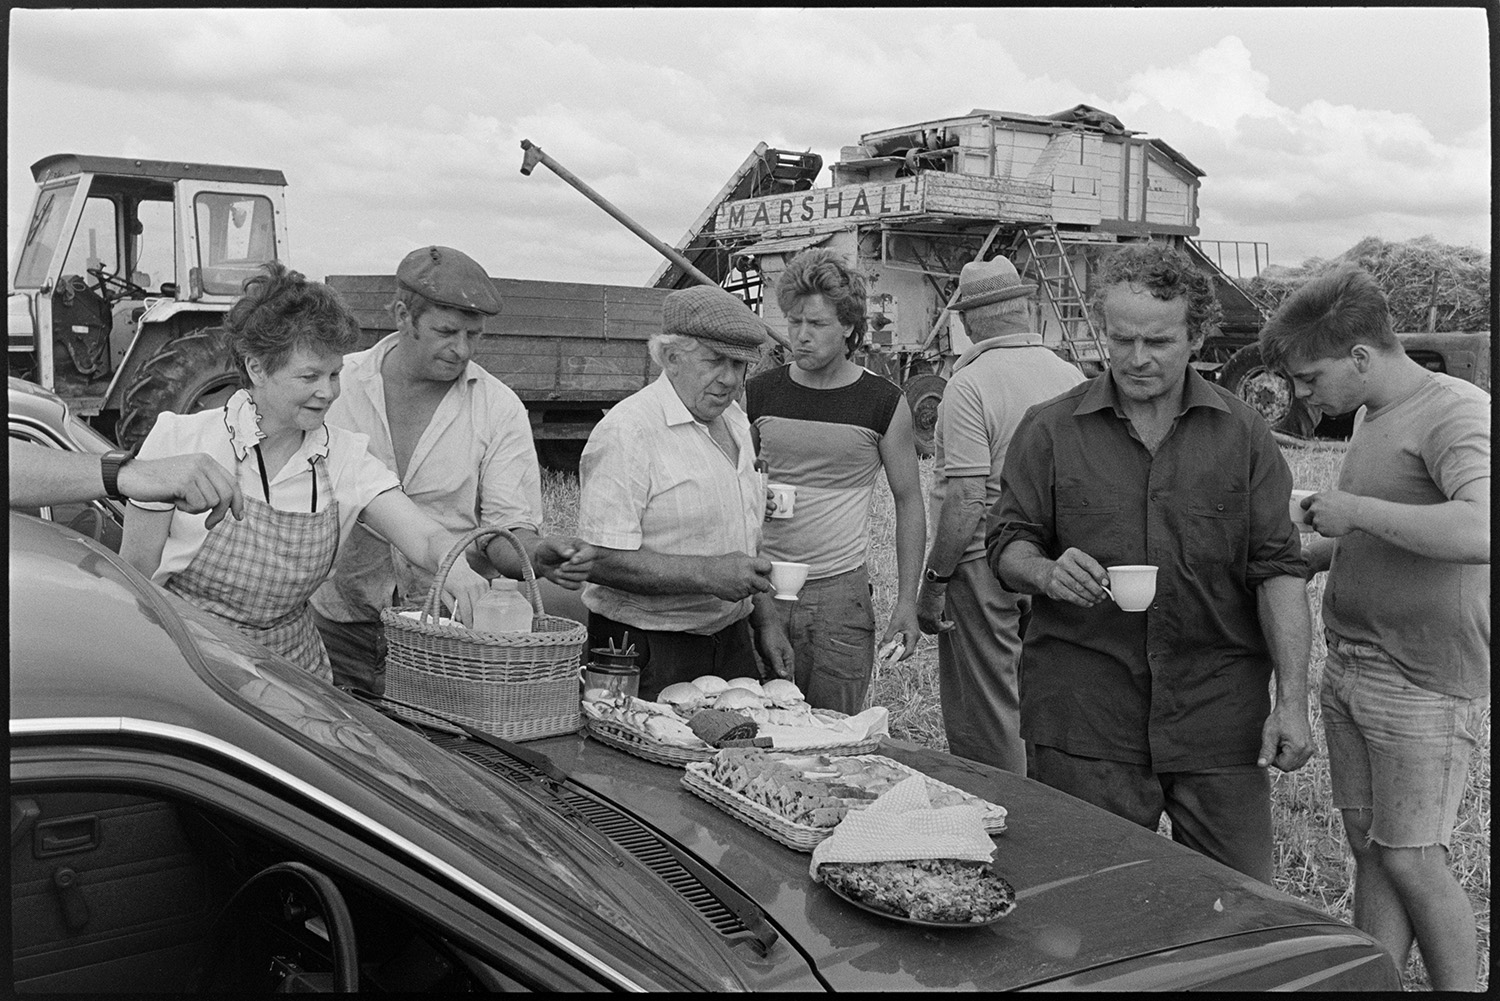 Reedcombers having tea break and working reed comber. 
[Members of the Down family and other men having a tea break with sandwiches and cake, from Reed combing in a field at Spittle Farm, Chulmleigh. Mrs Down is handing out items from a basket. A reed comber and tractor and trailer can be seen in the background.]